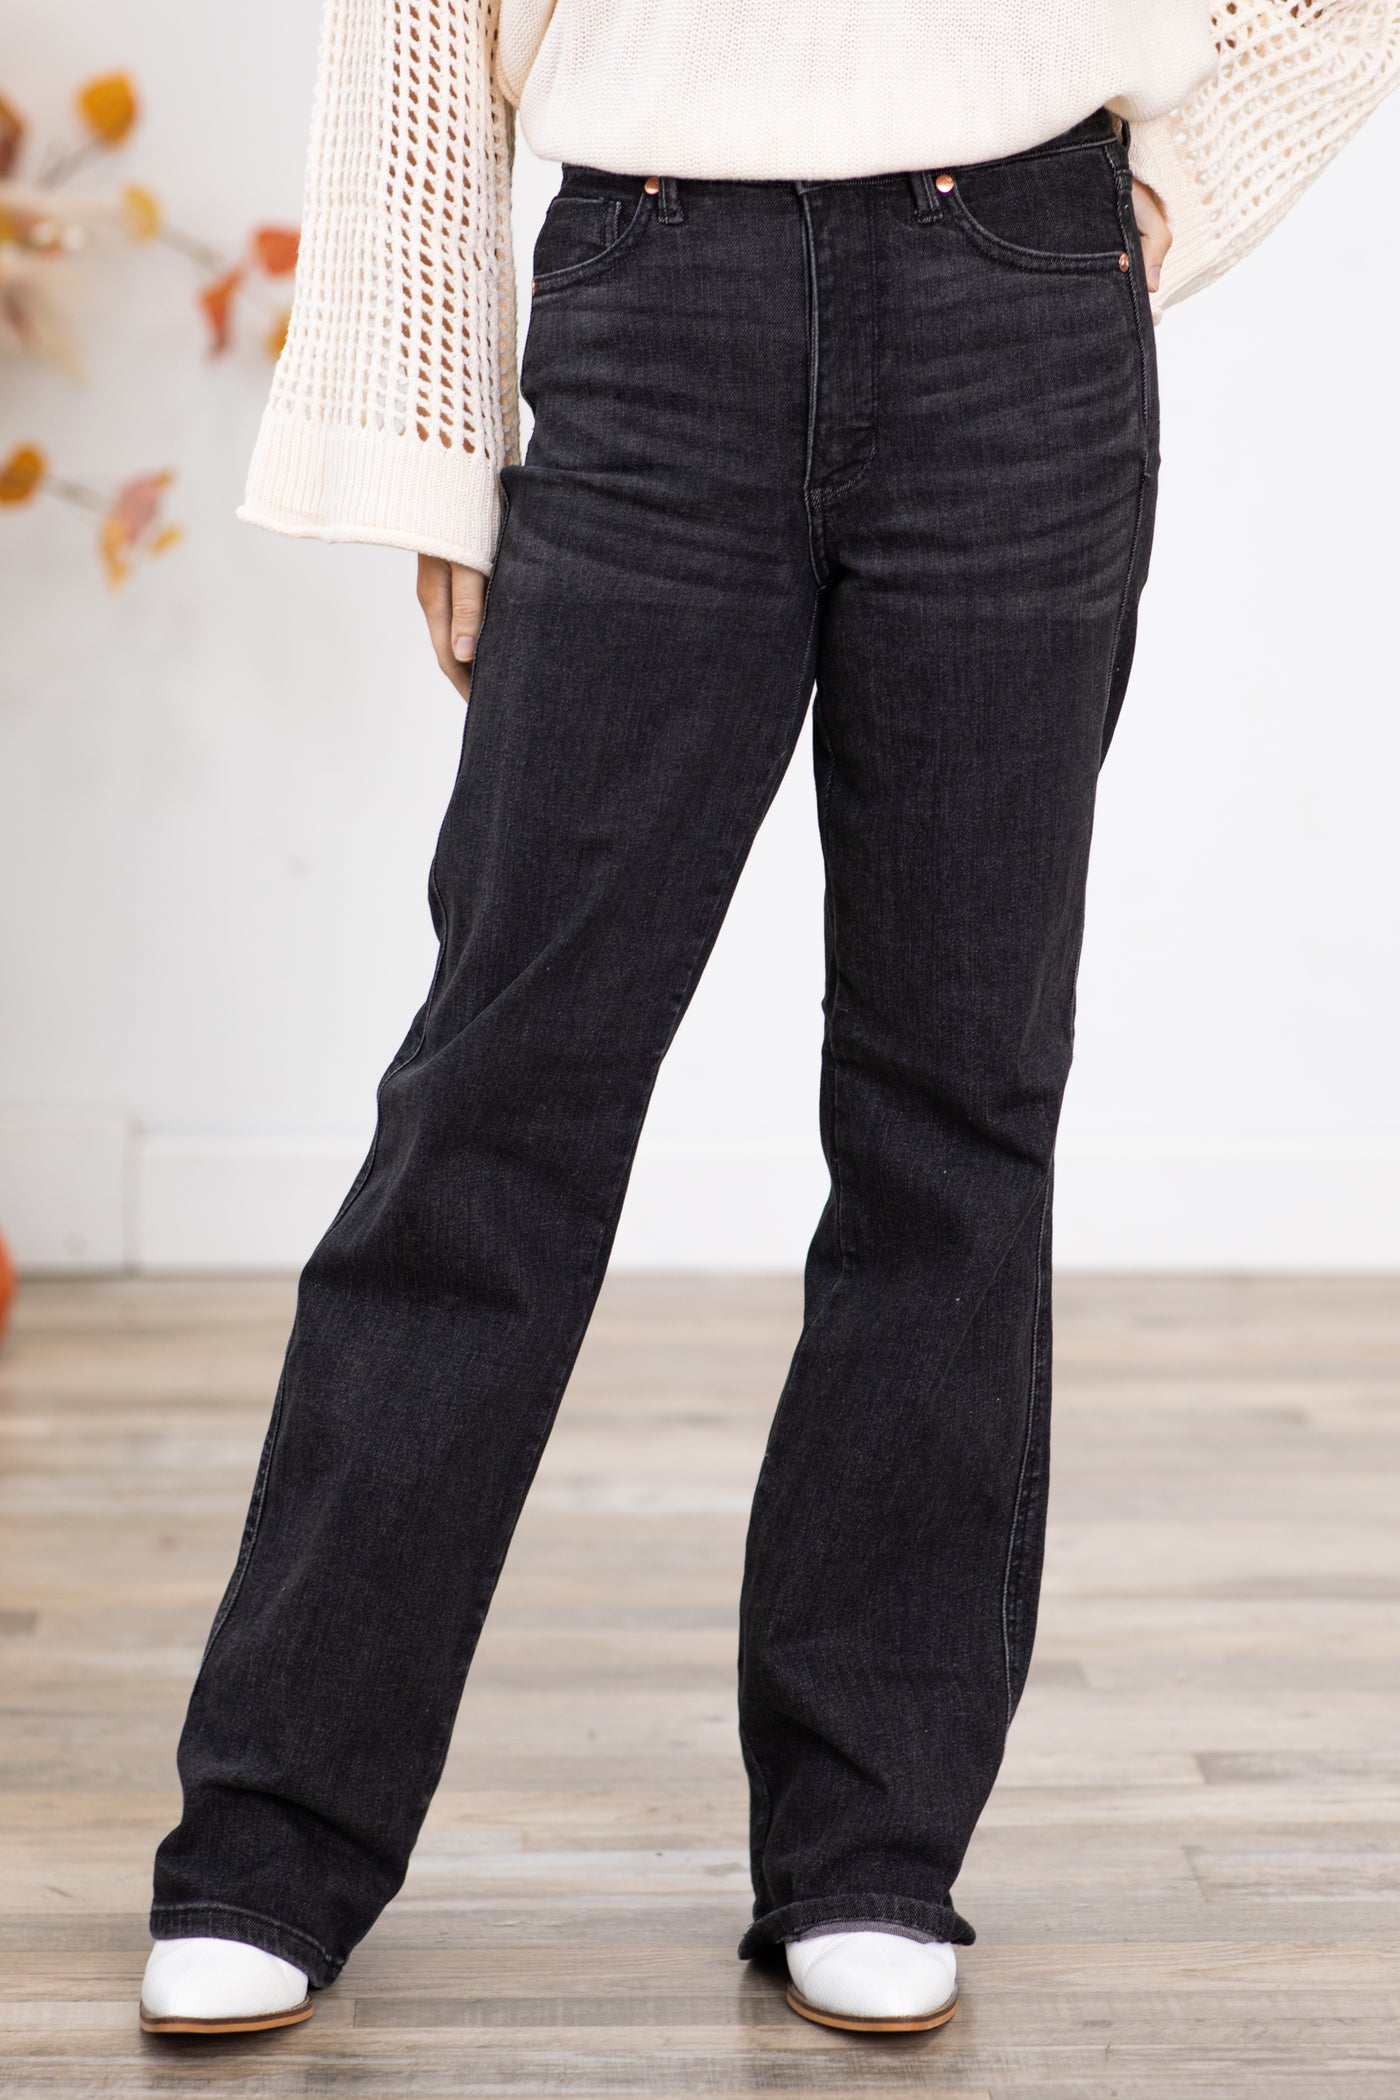 Judy Blue Washed Black Tummy Control Jeans · Filly Flair